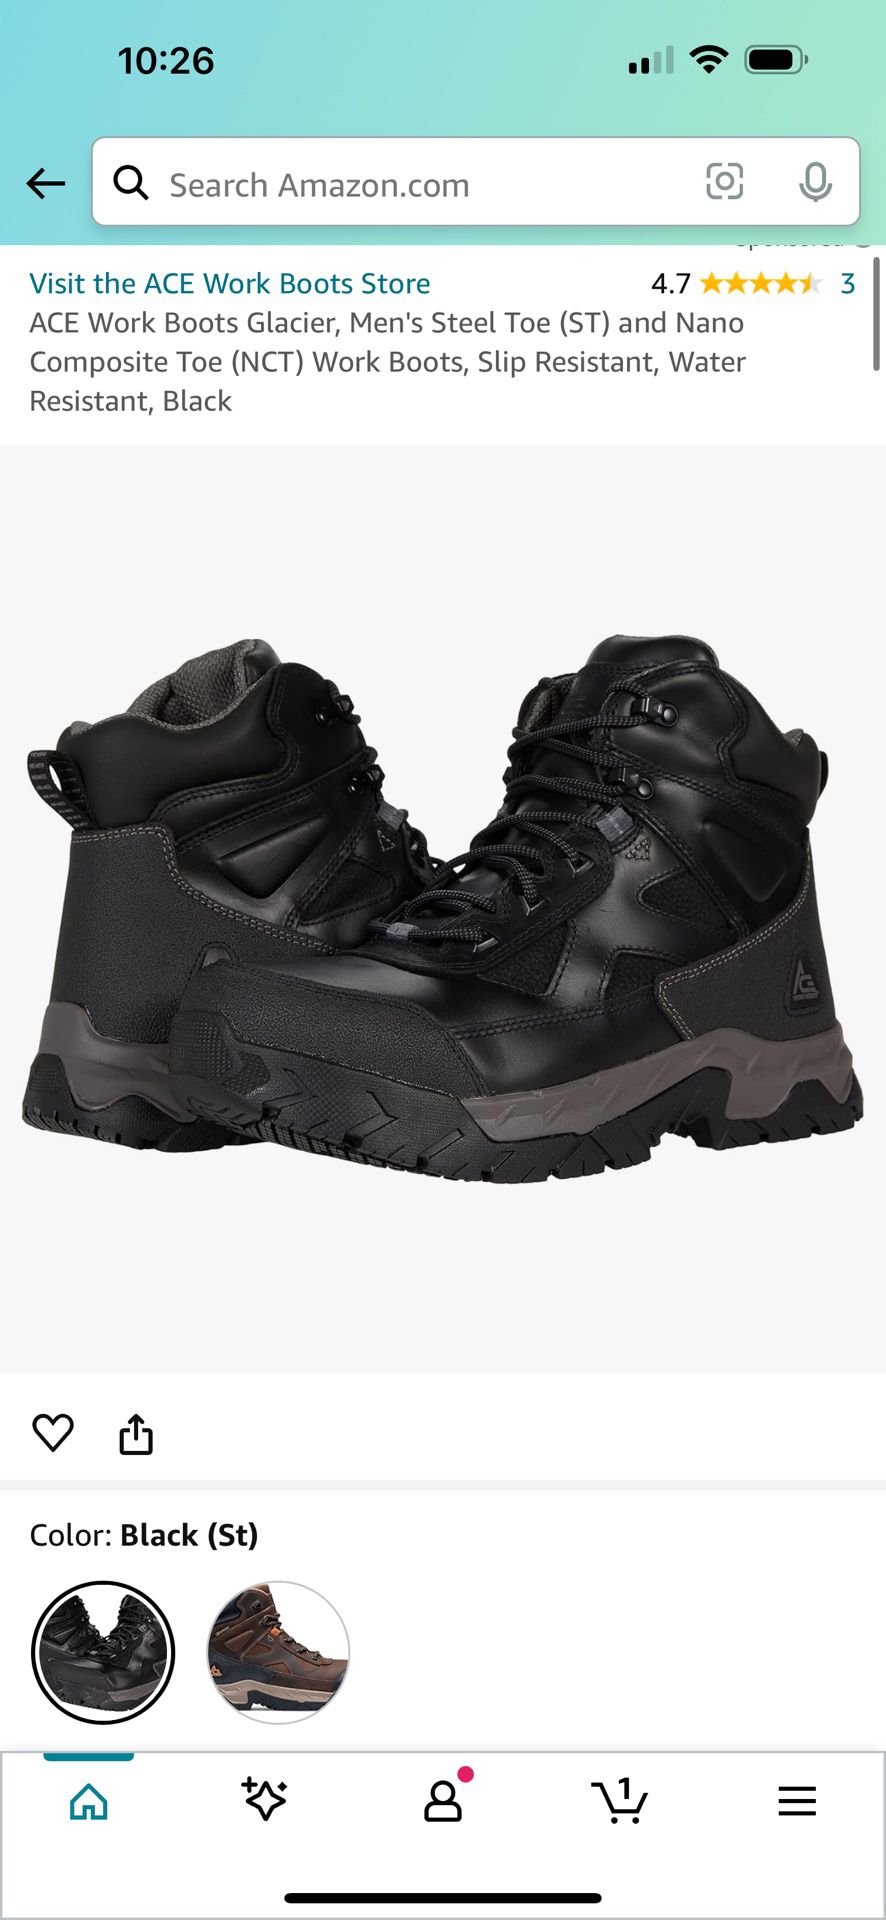 New Ace Steel Toe Work Boots 11.5